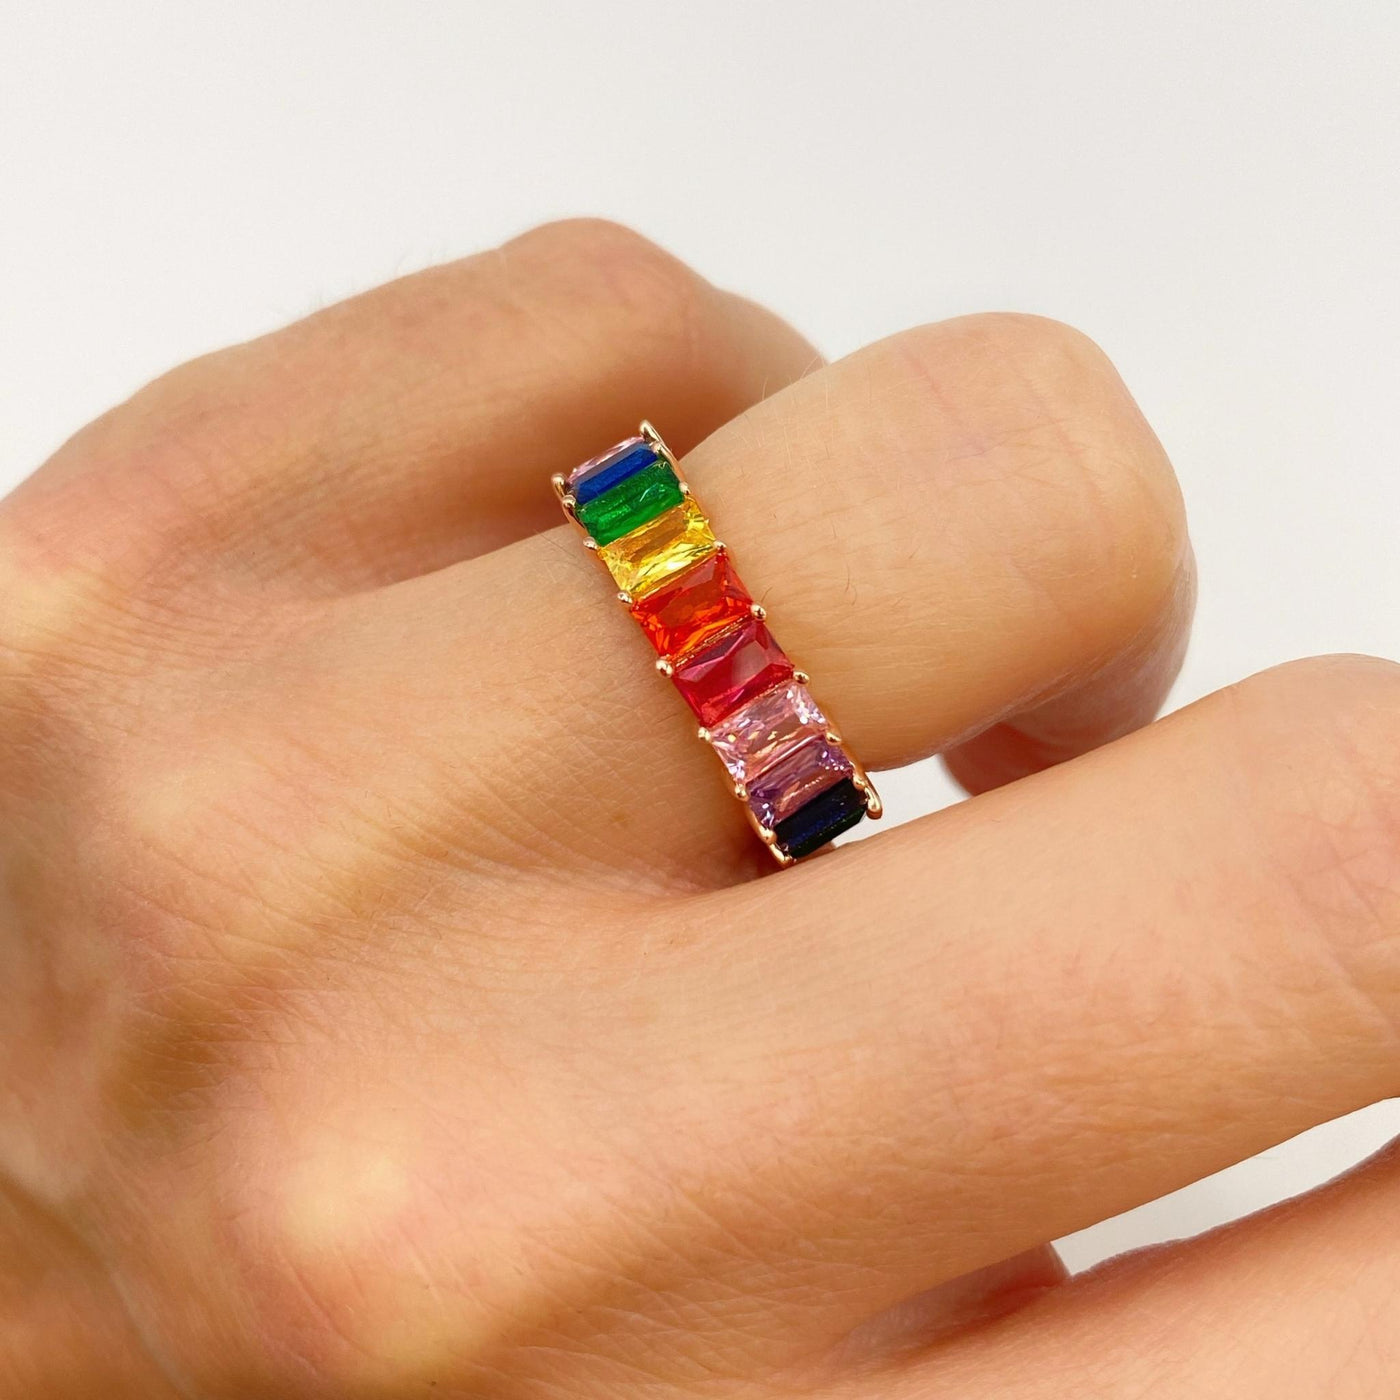 Silver band ring with multicolor rectangle stones